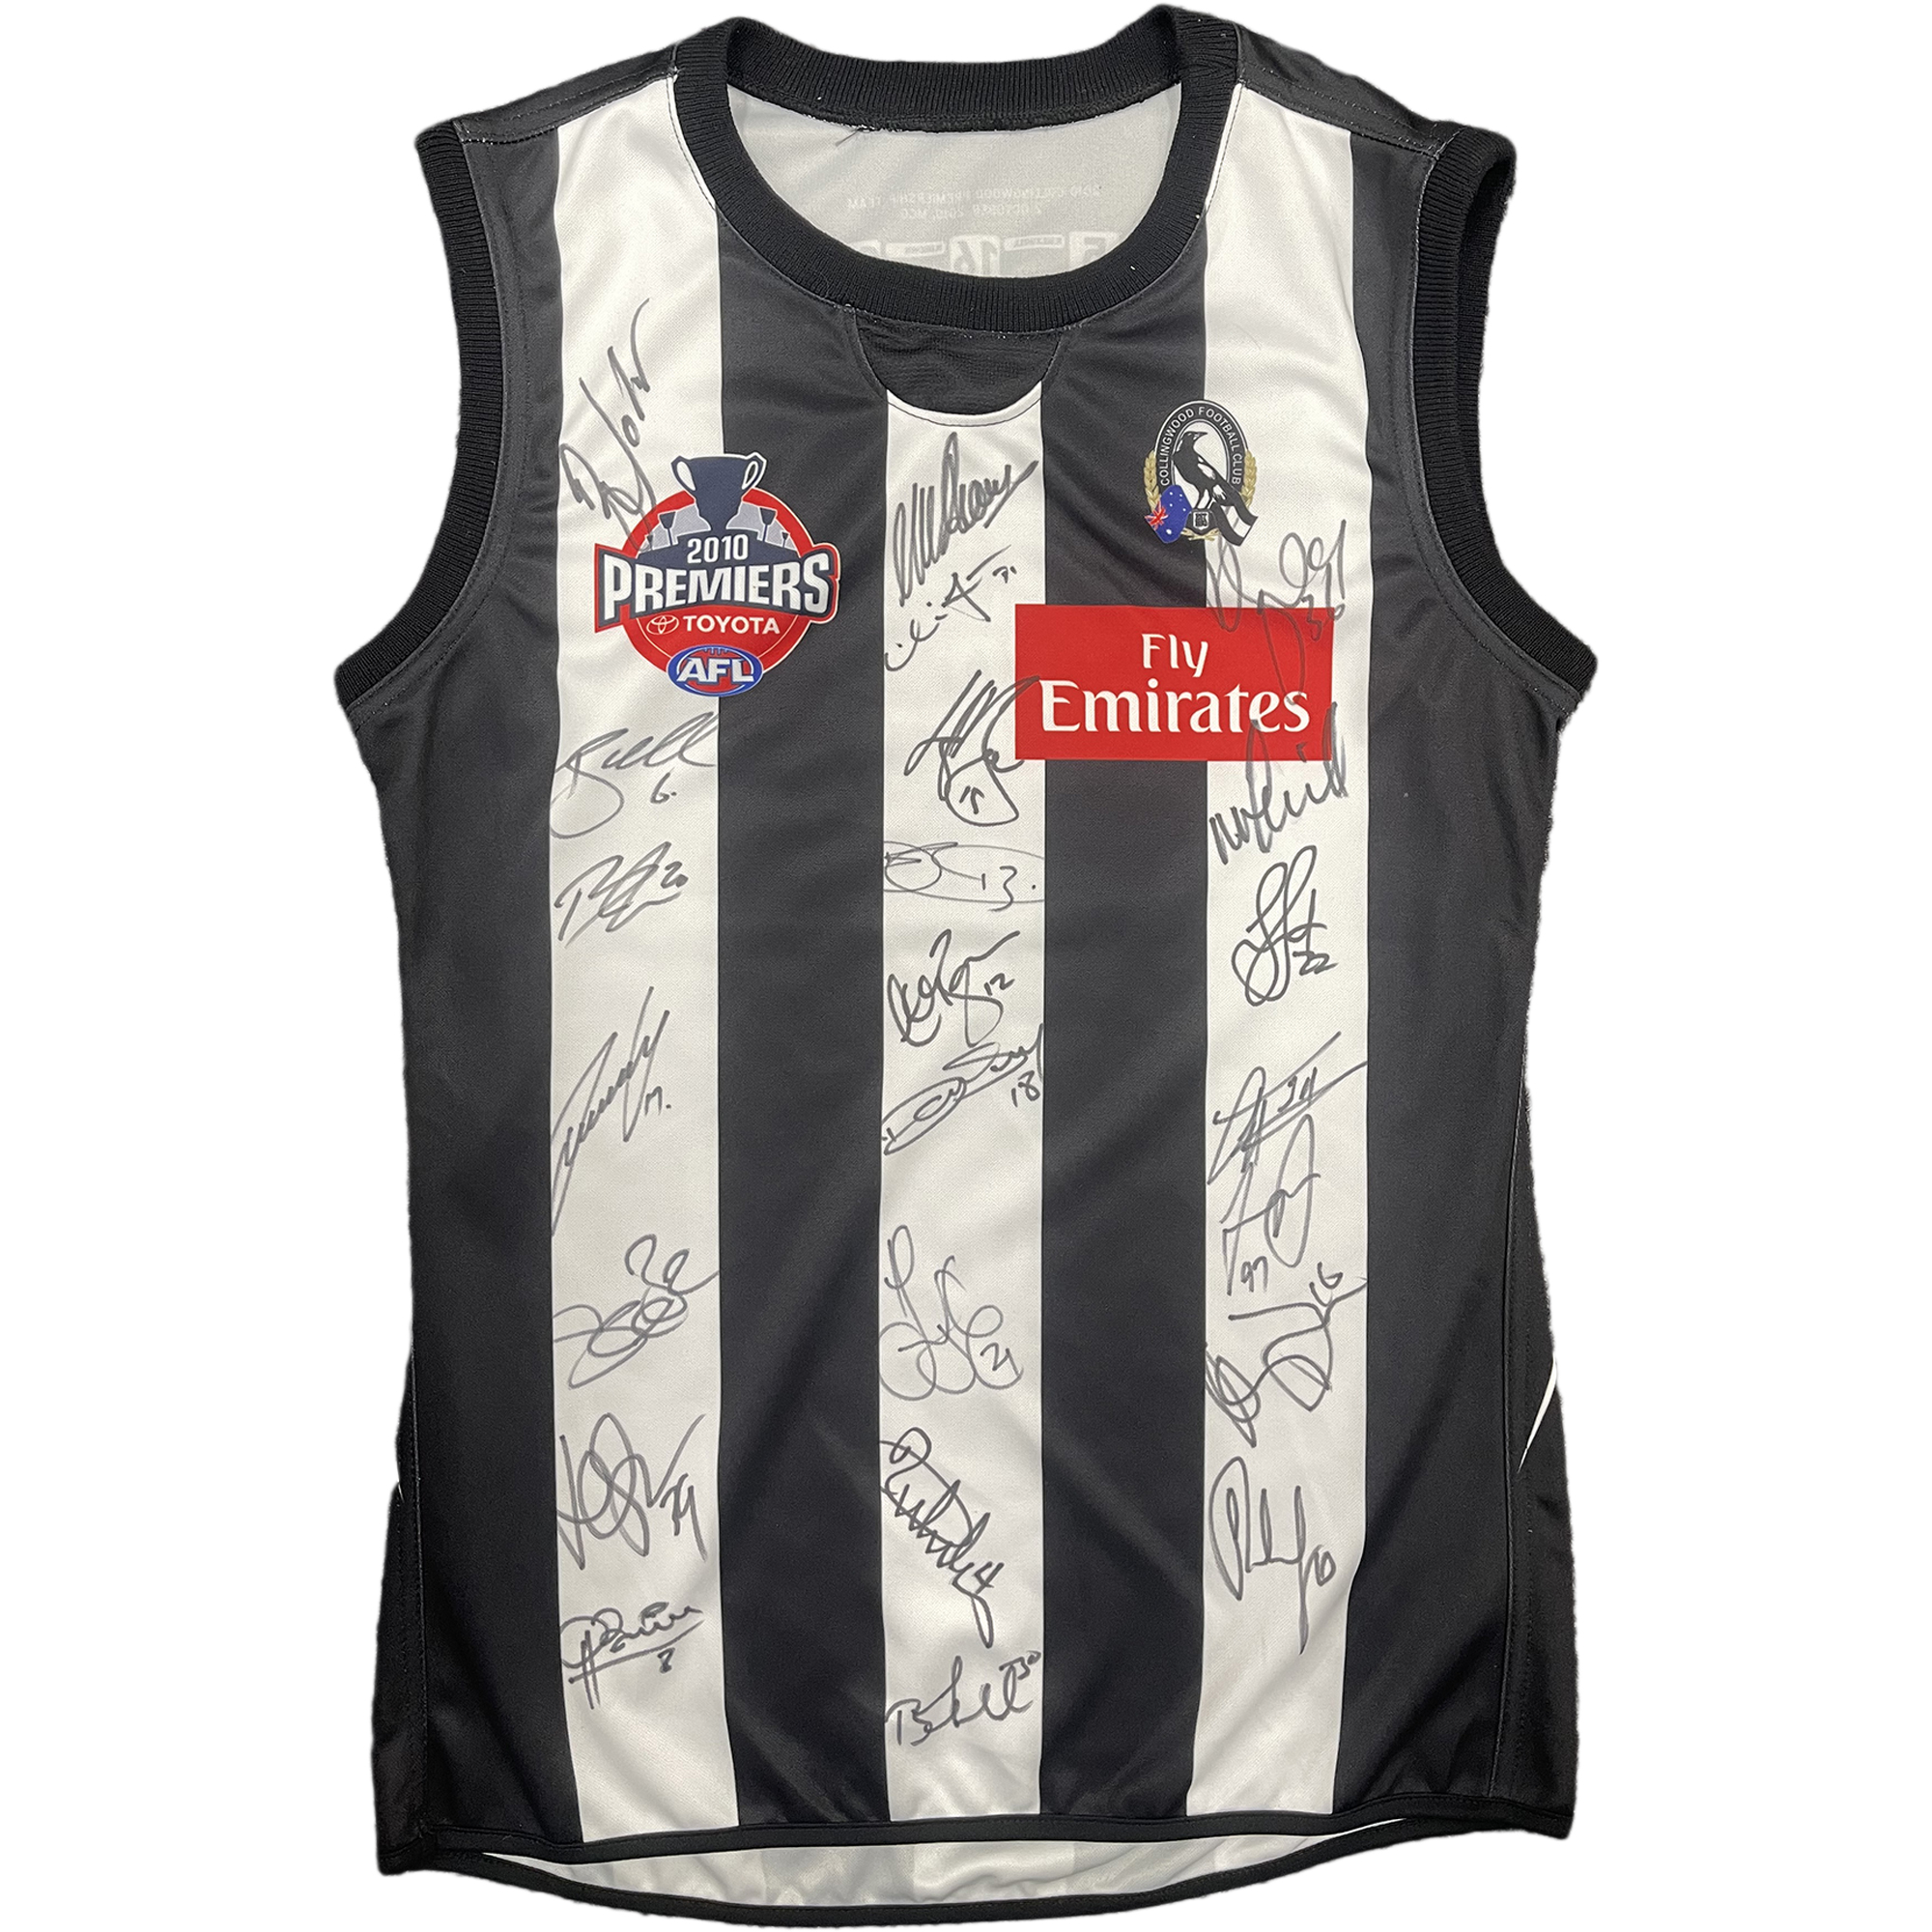 Collingwood Magpies – “Premiership Perfection” 2010 ...